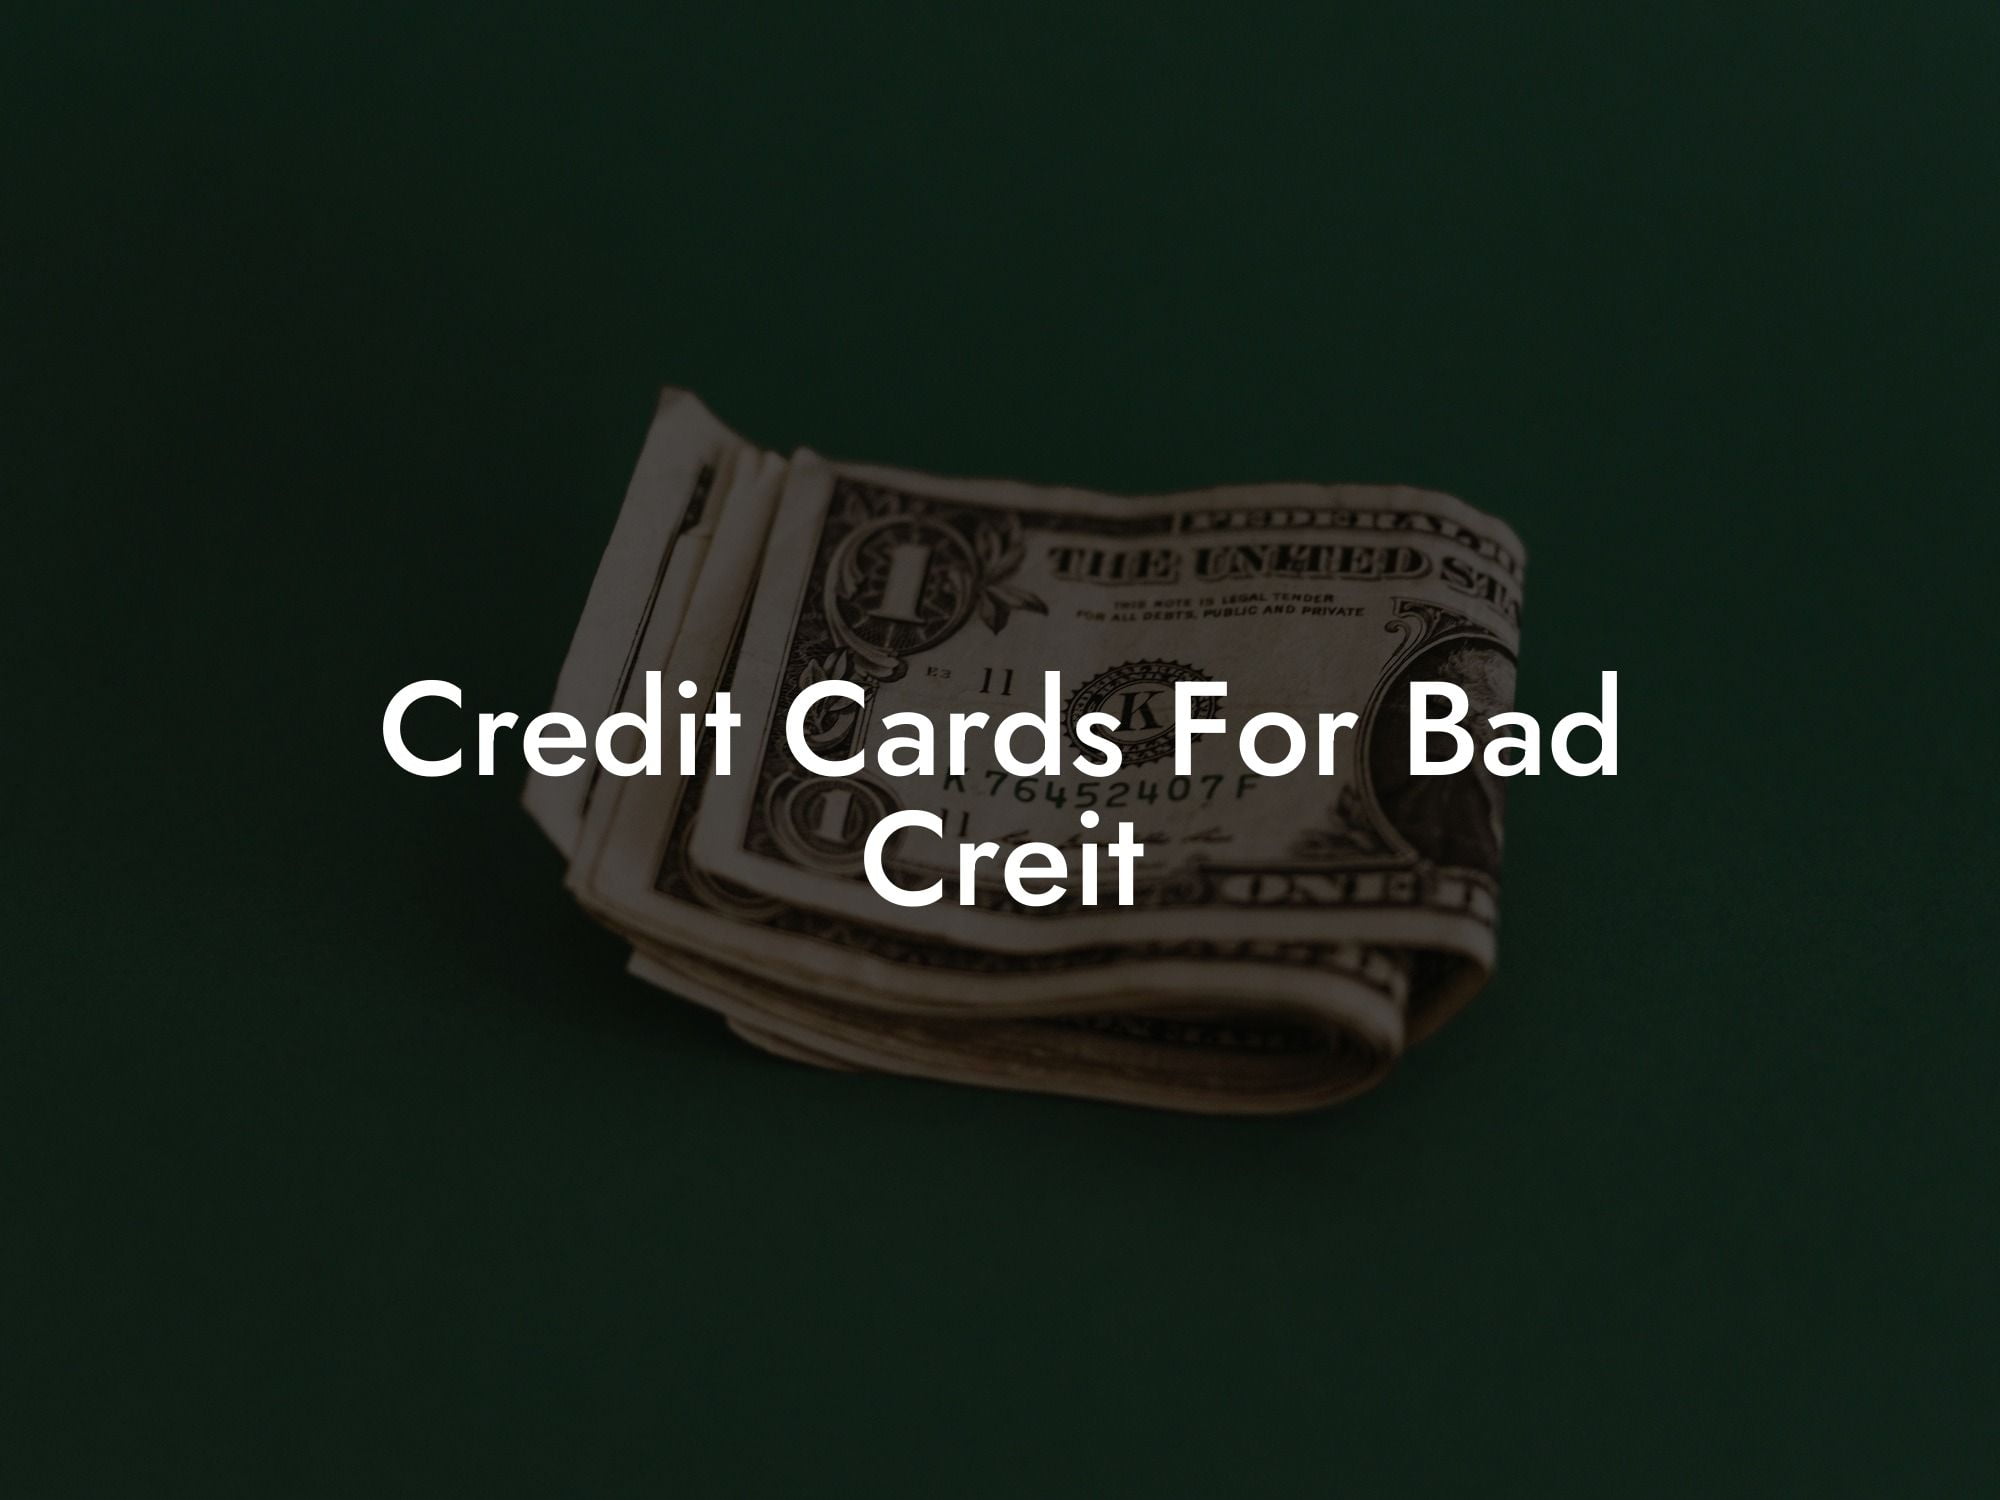 Credit Cards For Bad Creit